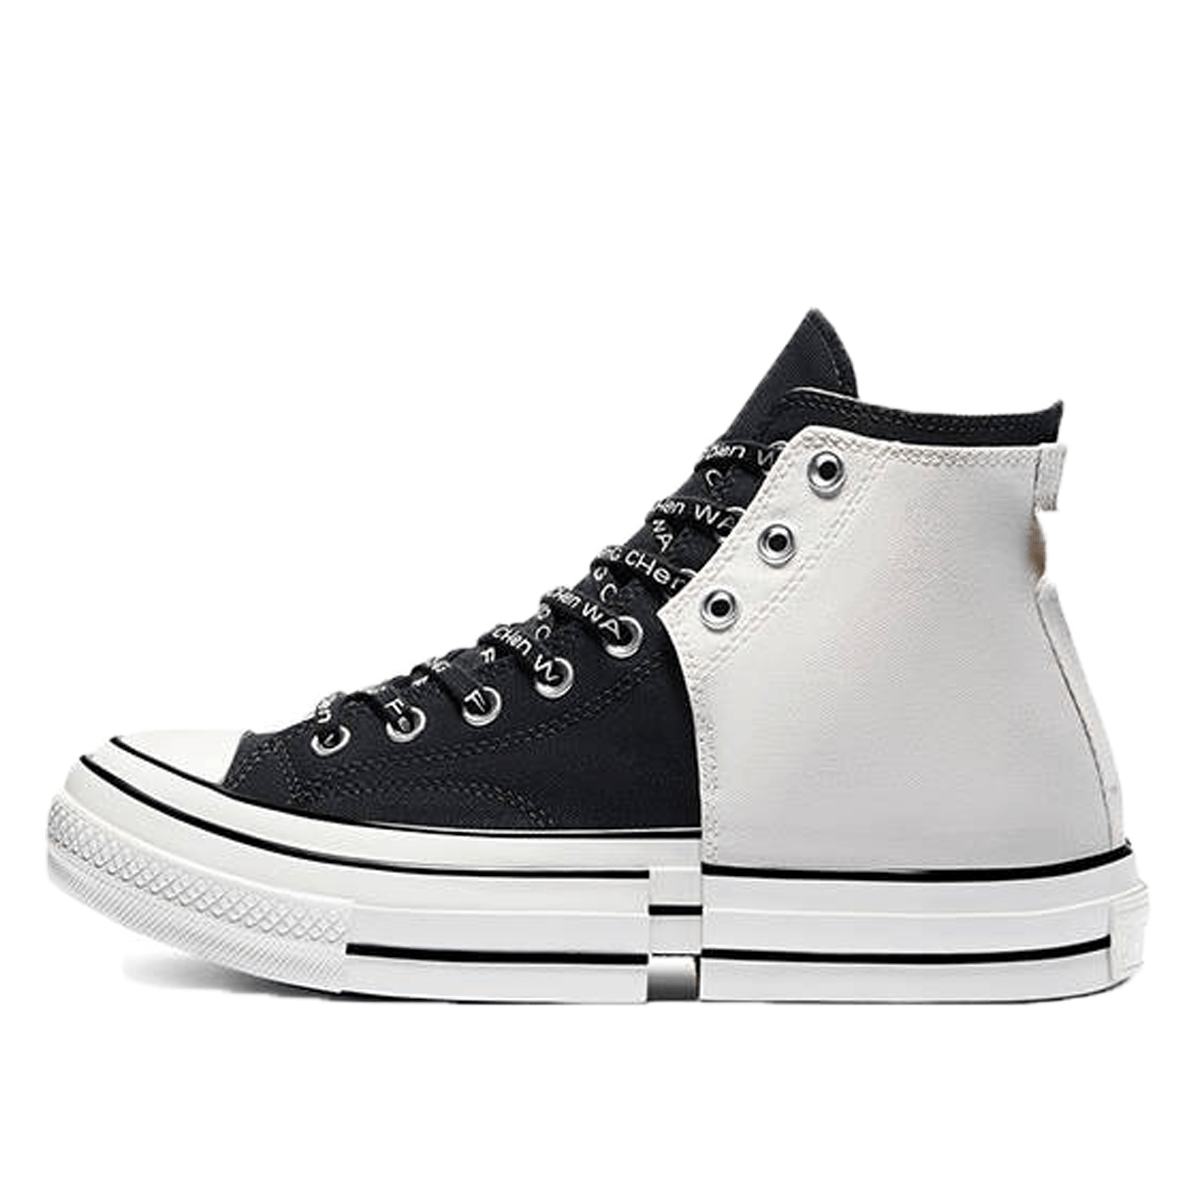 converse chuck taylor all star 2 in 1